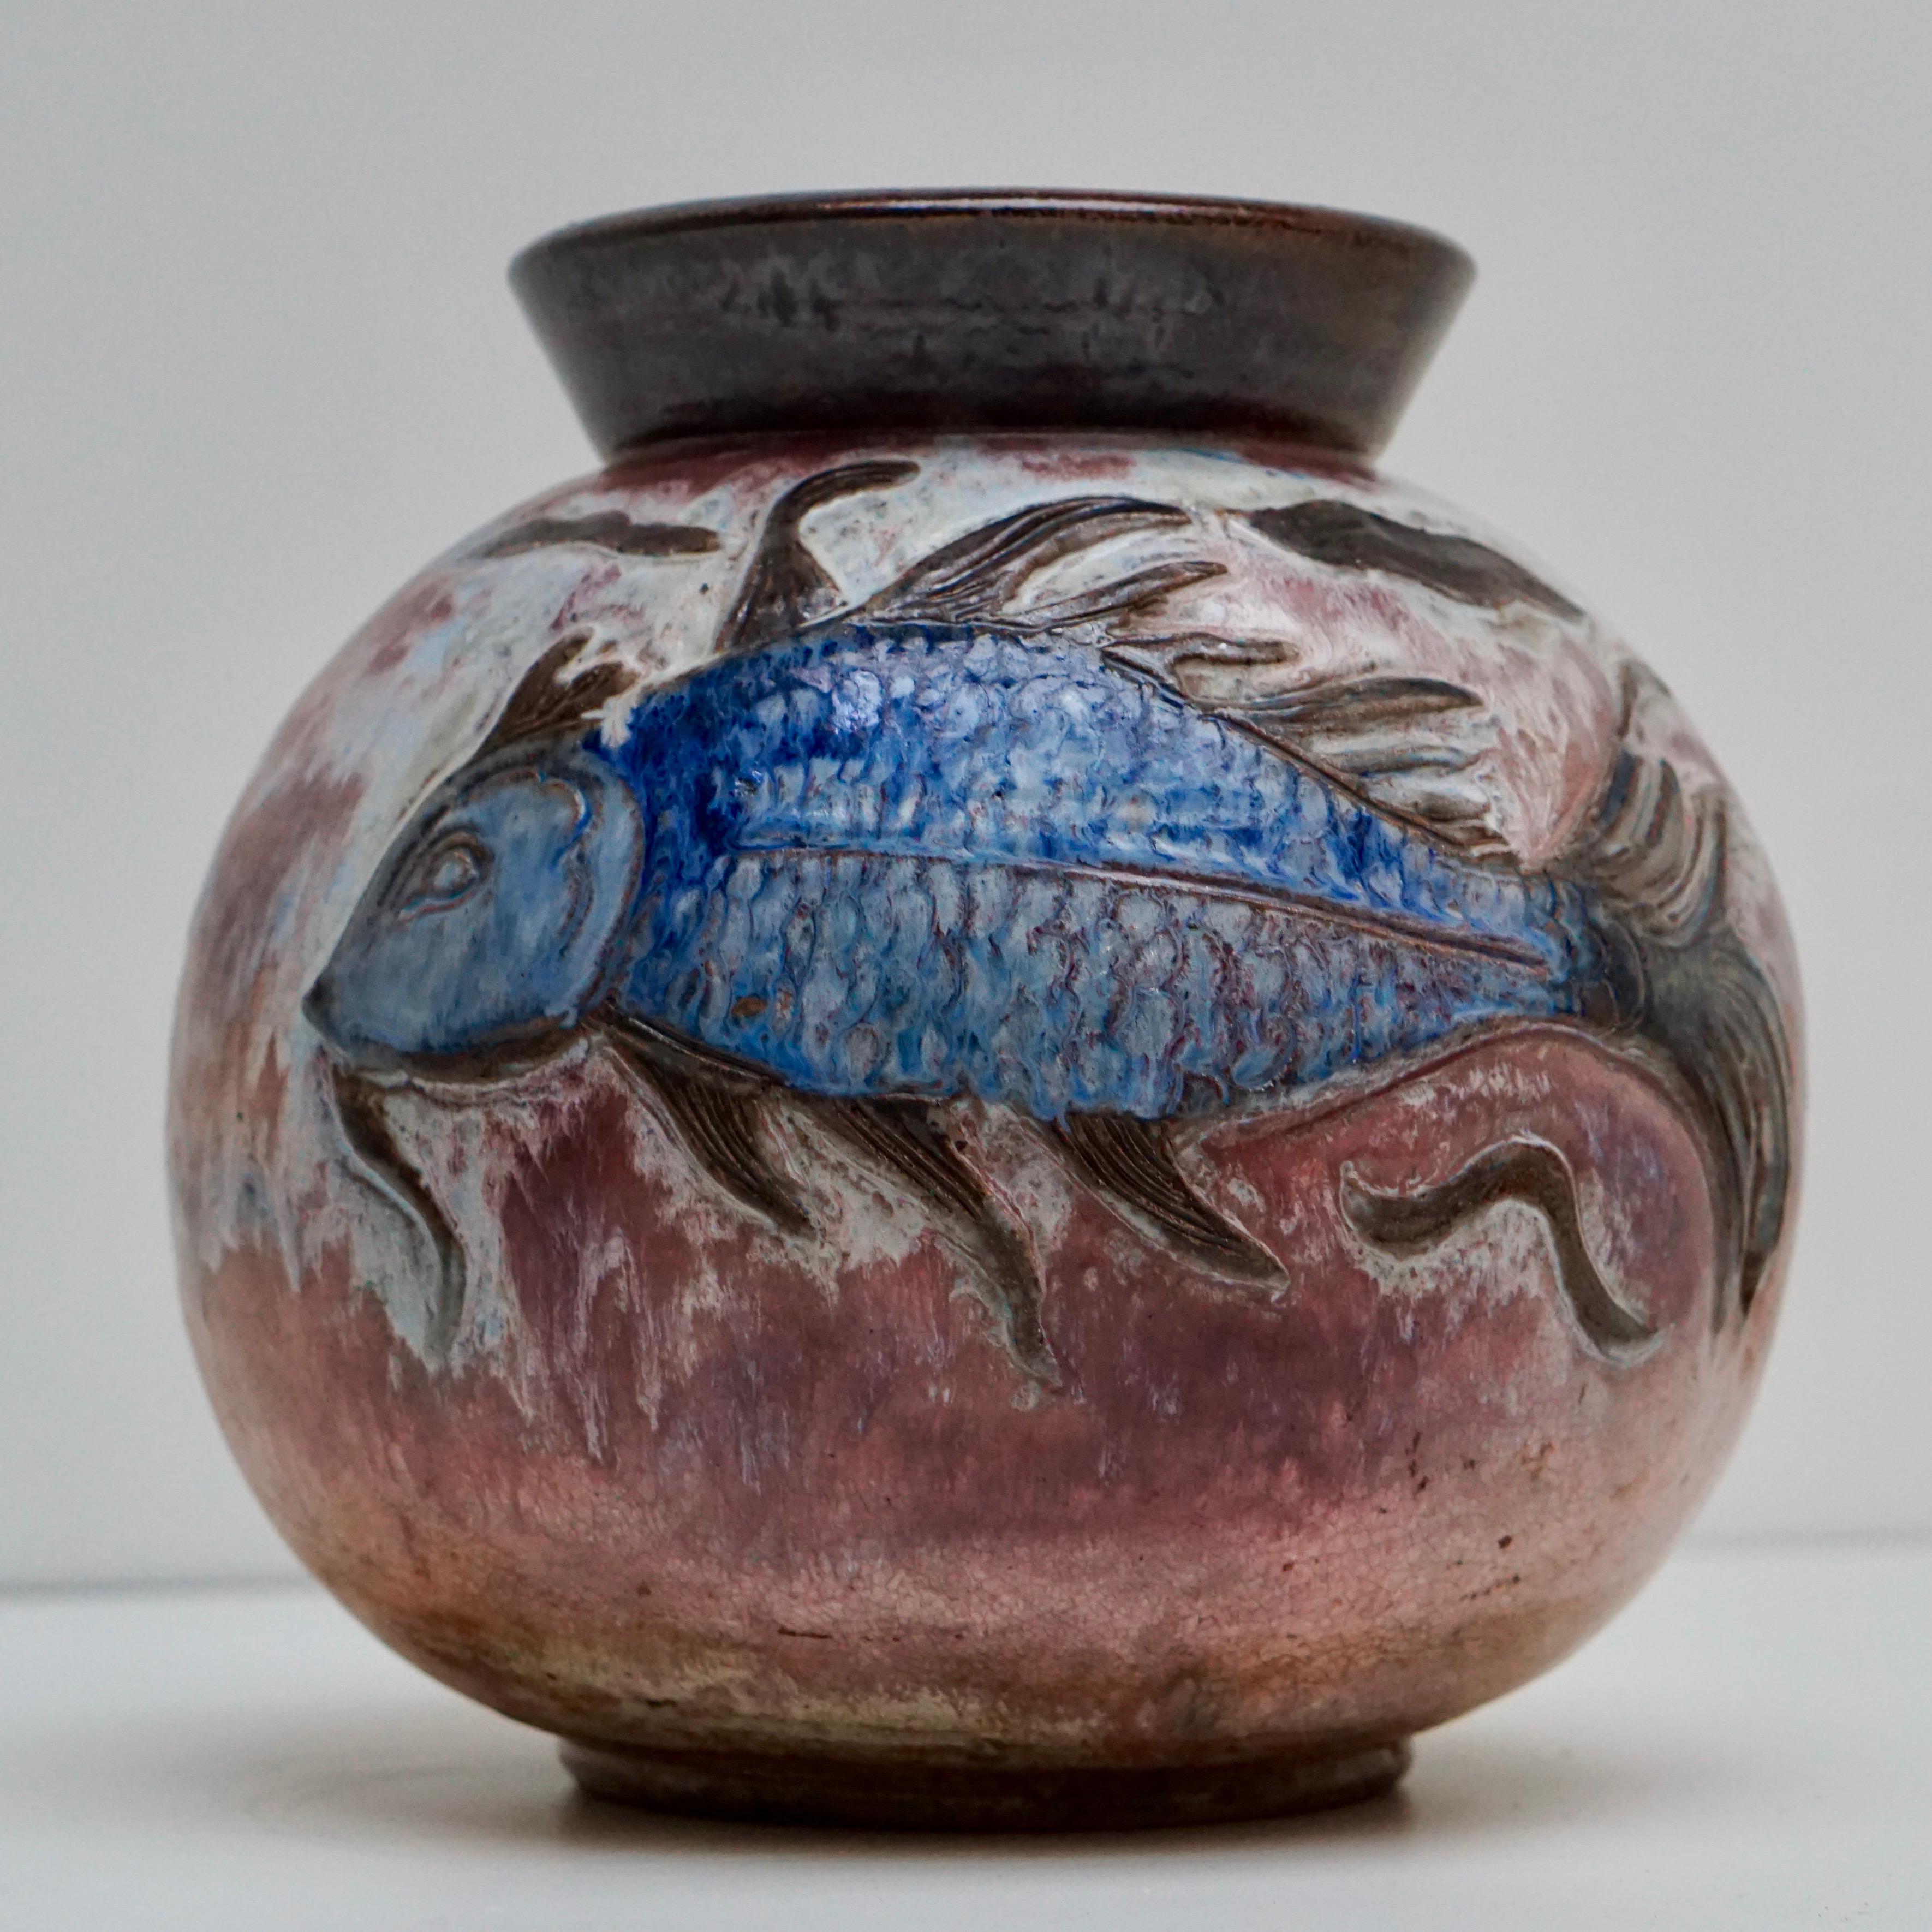 Vase of large proportions, decorated with a colorful fish.
Planter, vessel, urn, cachepot.
Measures: 
Diameter 32 cm.
Height 32 cm.